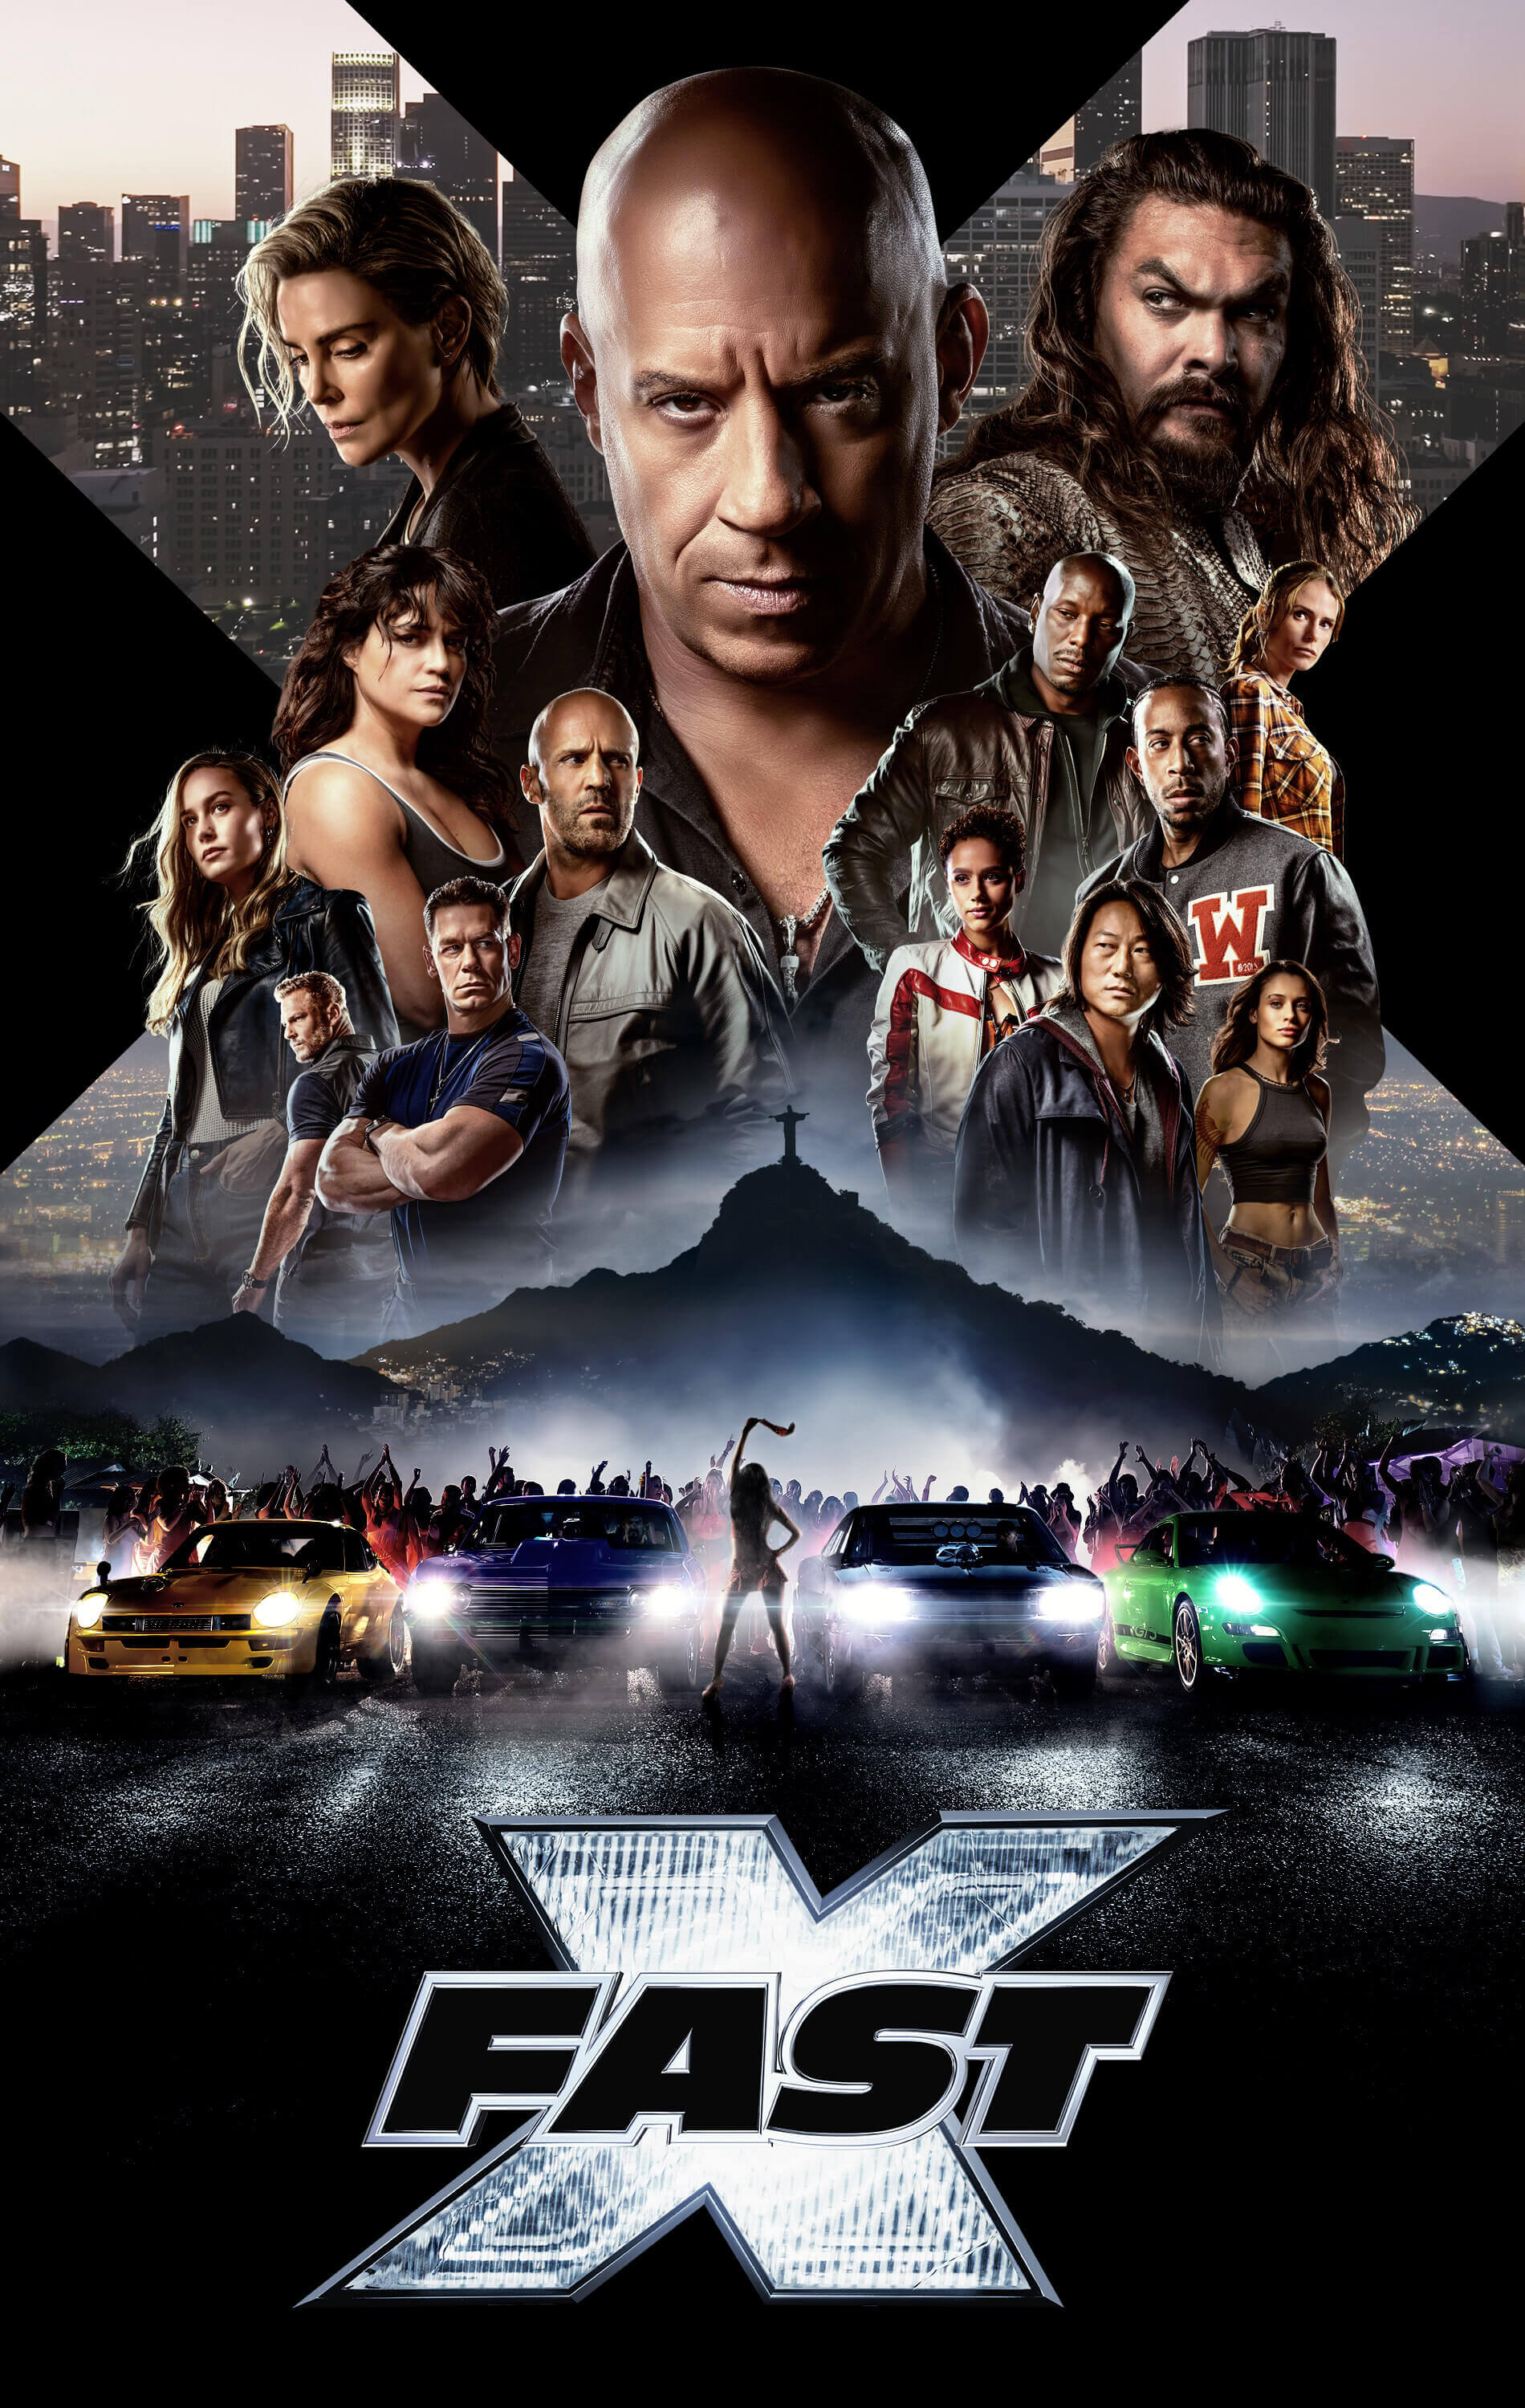 Fast & Furious: Complete box office hauls, ticket sales, highest-grossing films in Vin Diesel-led series - NEWS